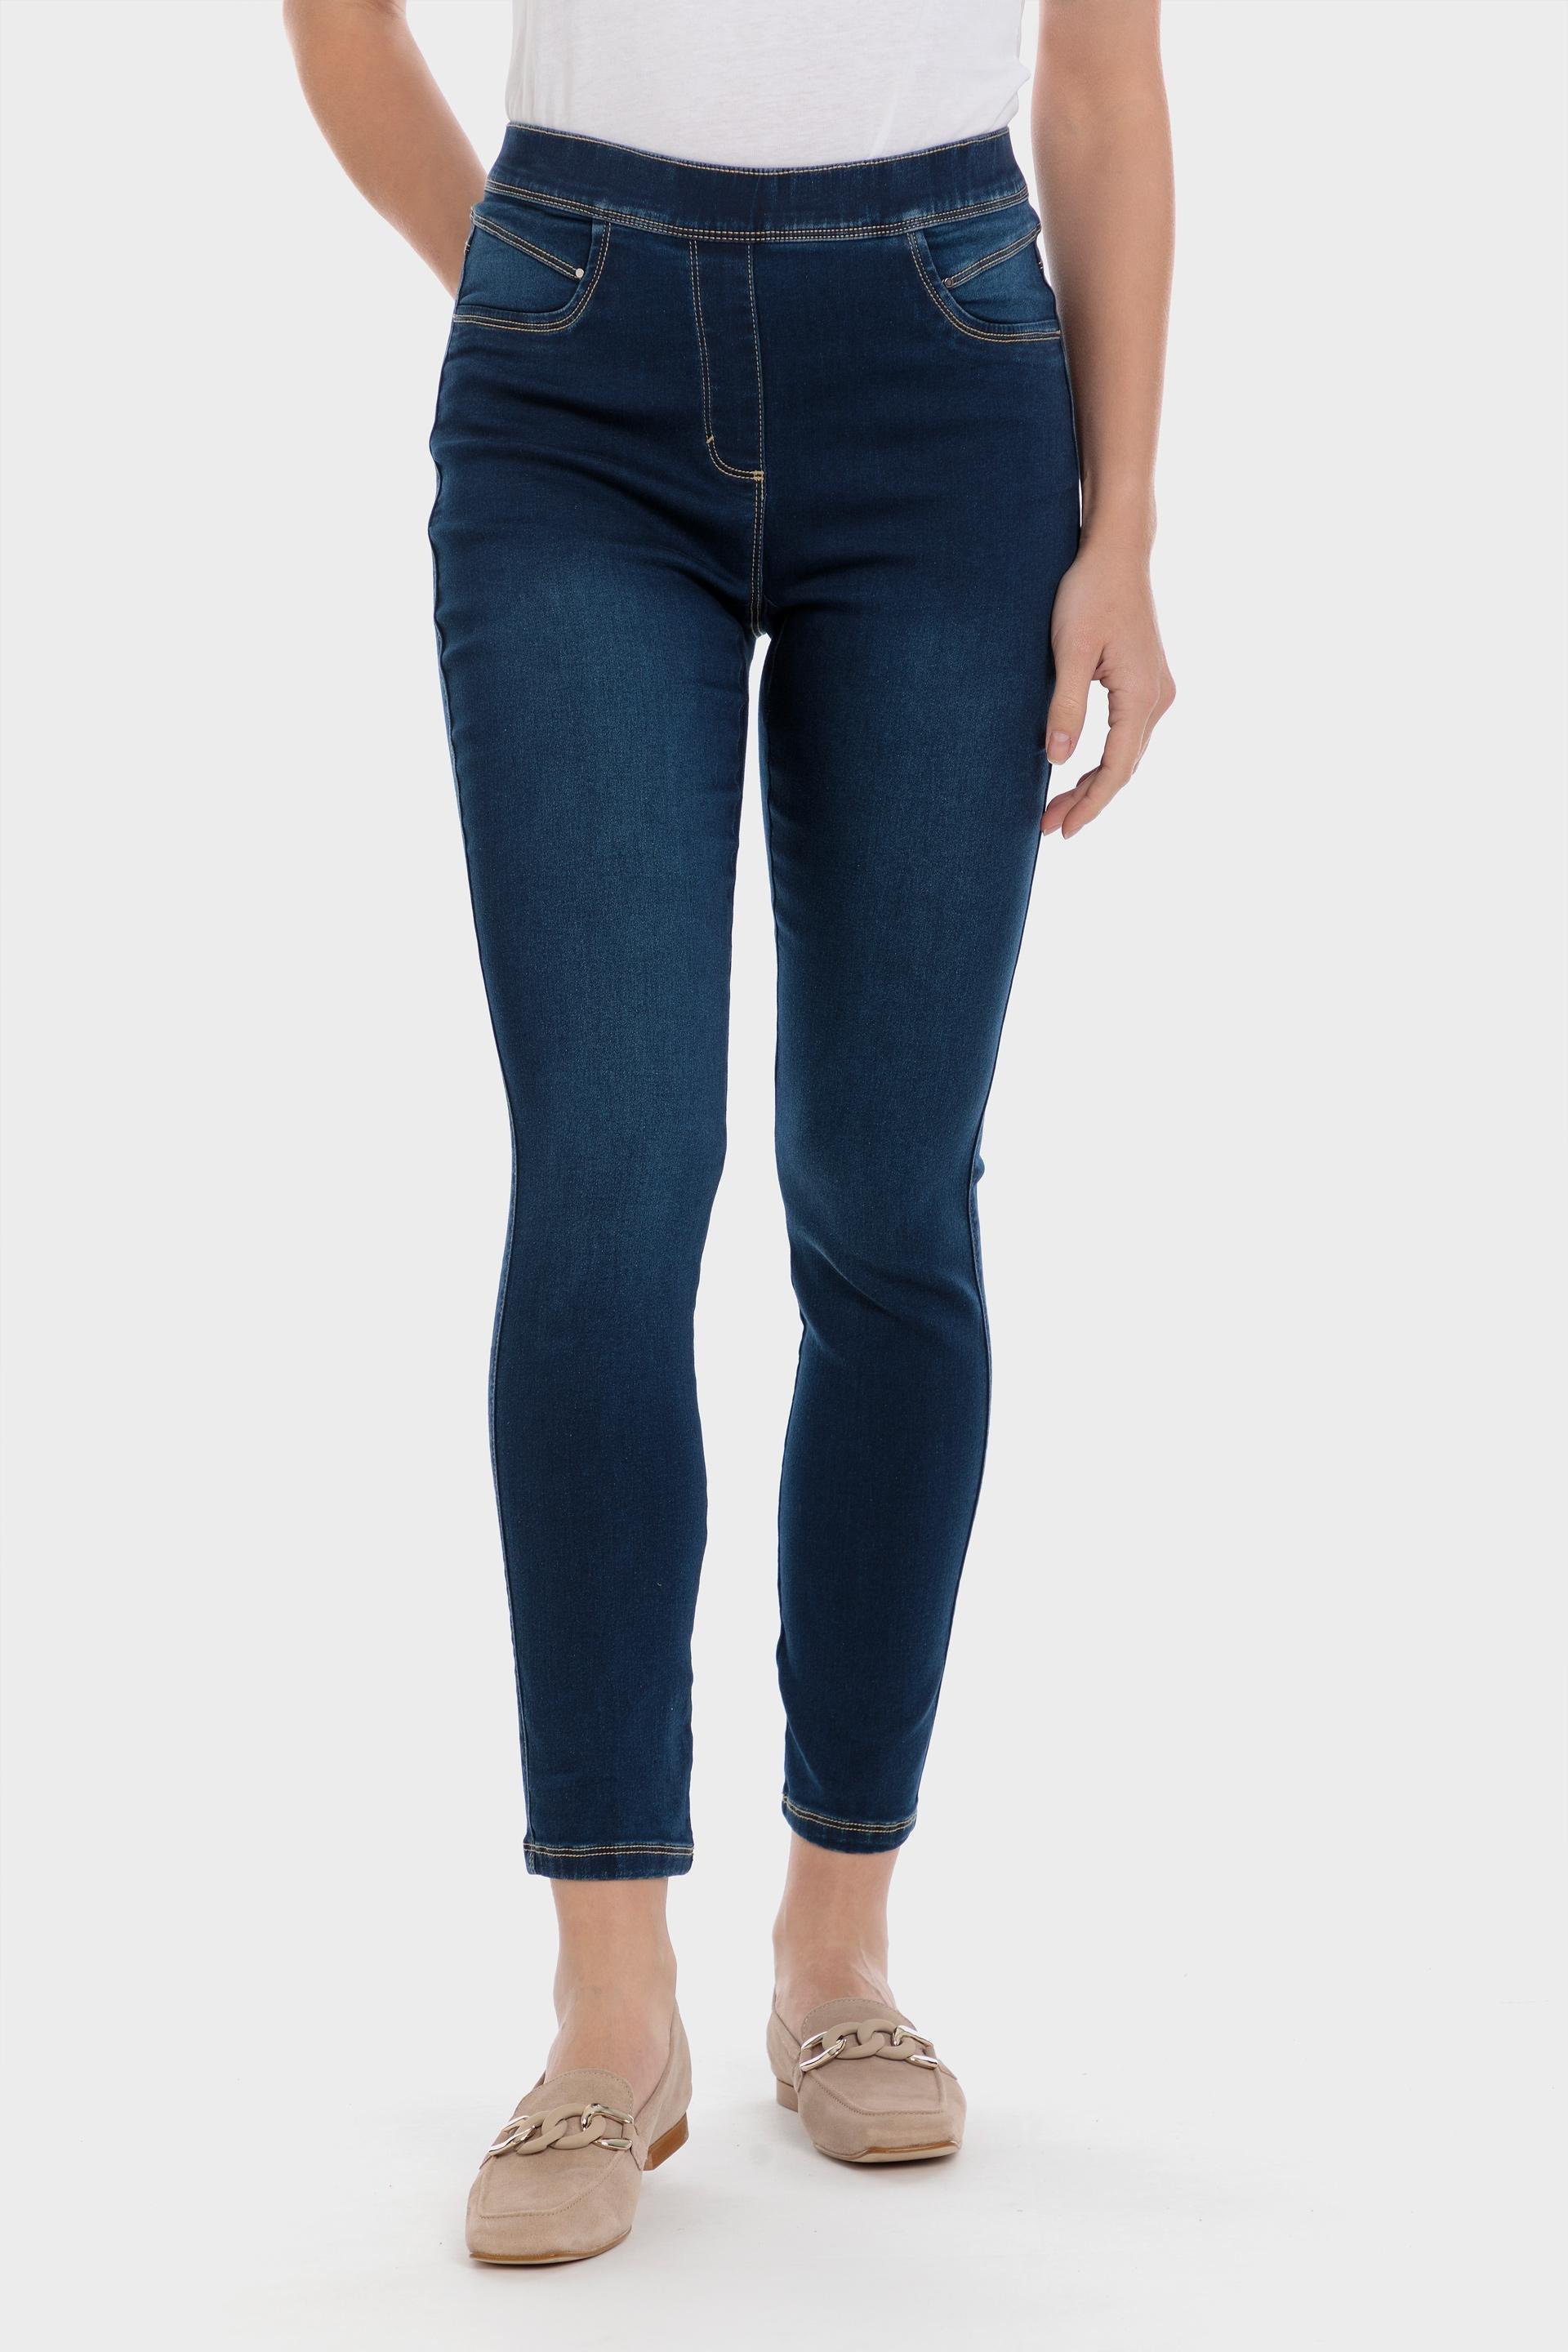 Punt Roma - Navy Super Skinny Trousers